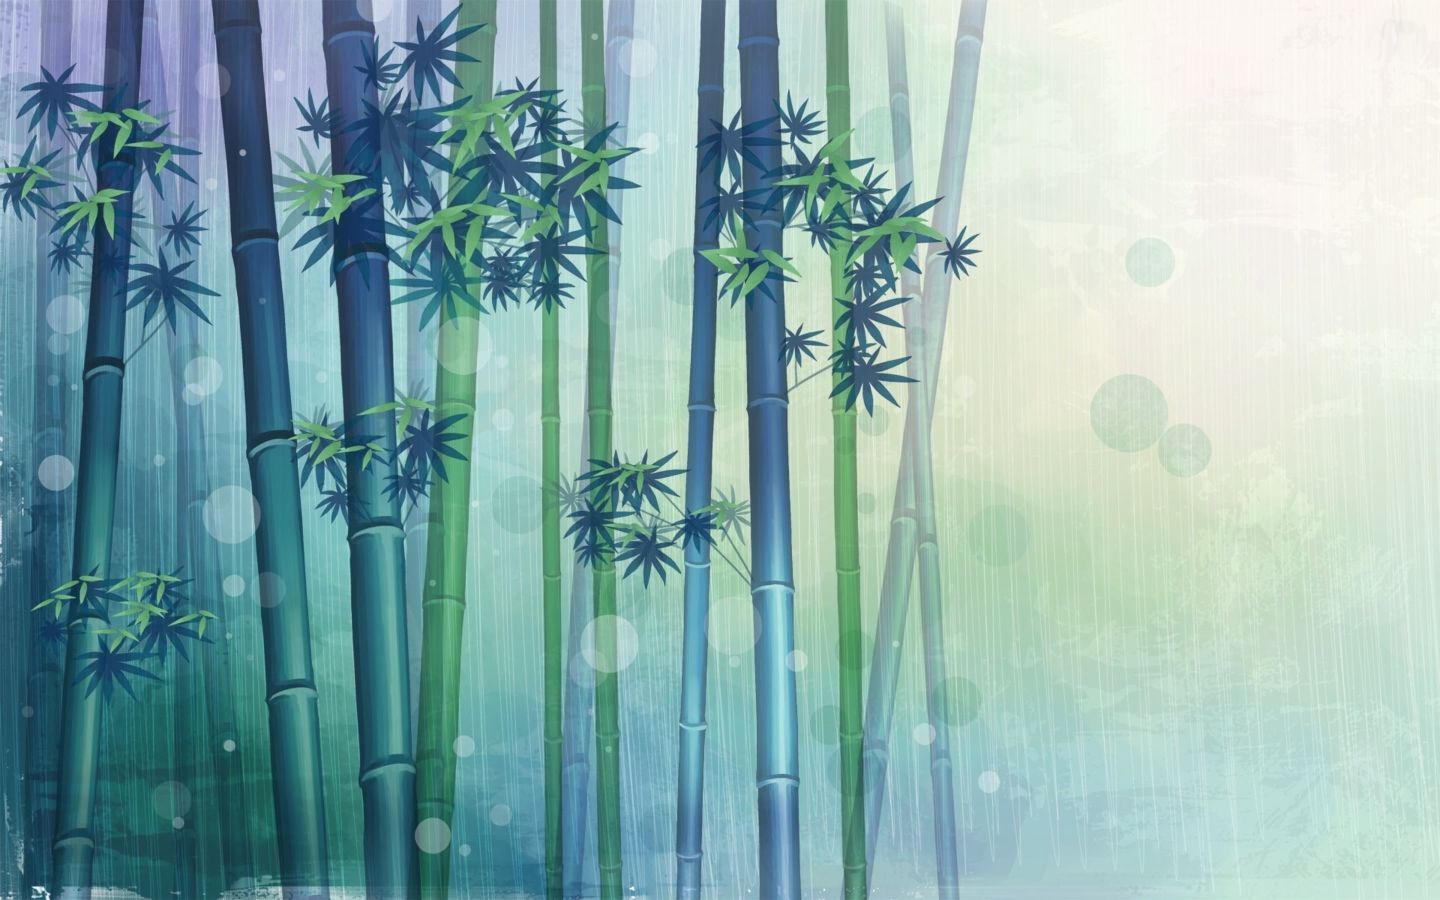 Bamboo Forest MacBook Pro Wallpaper HD | HD Wallpapers Source